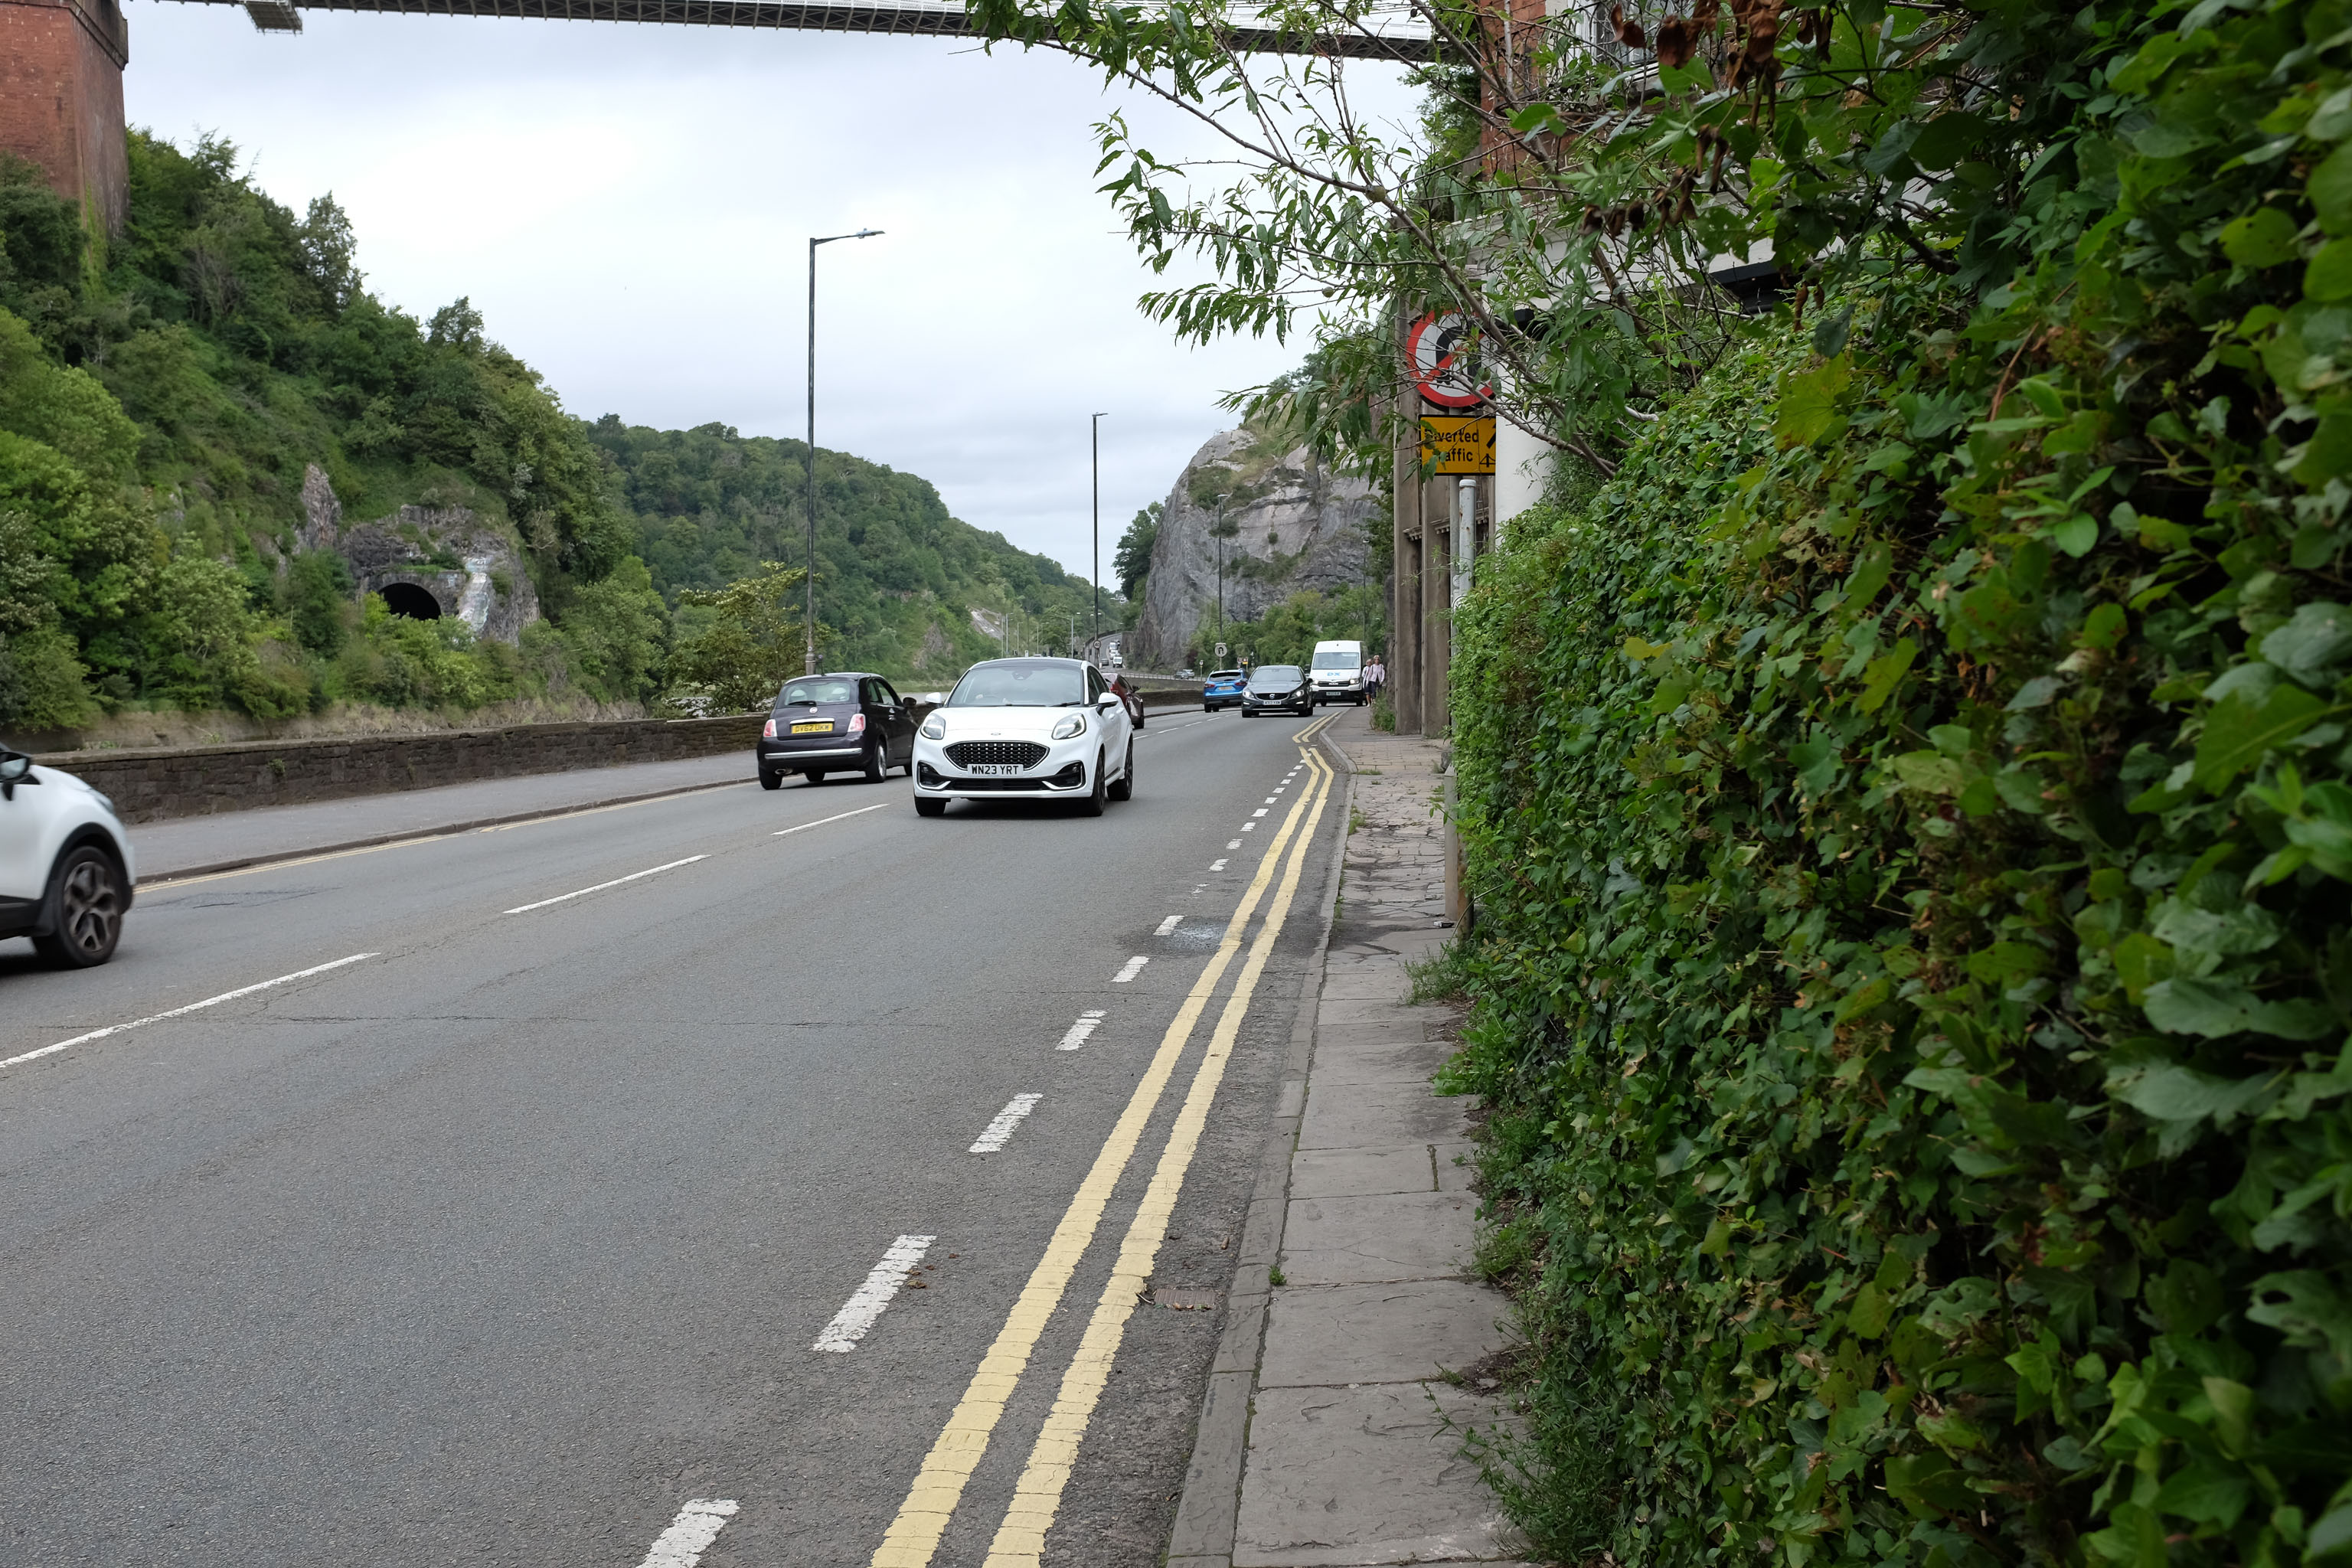 Narrow Strip
The Hotwell Road really needs more facilities for pedestrians. I spotted plenty of other walkers just on my brief trip along this short section, bu...